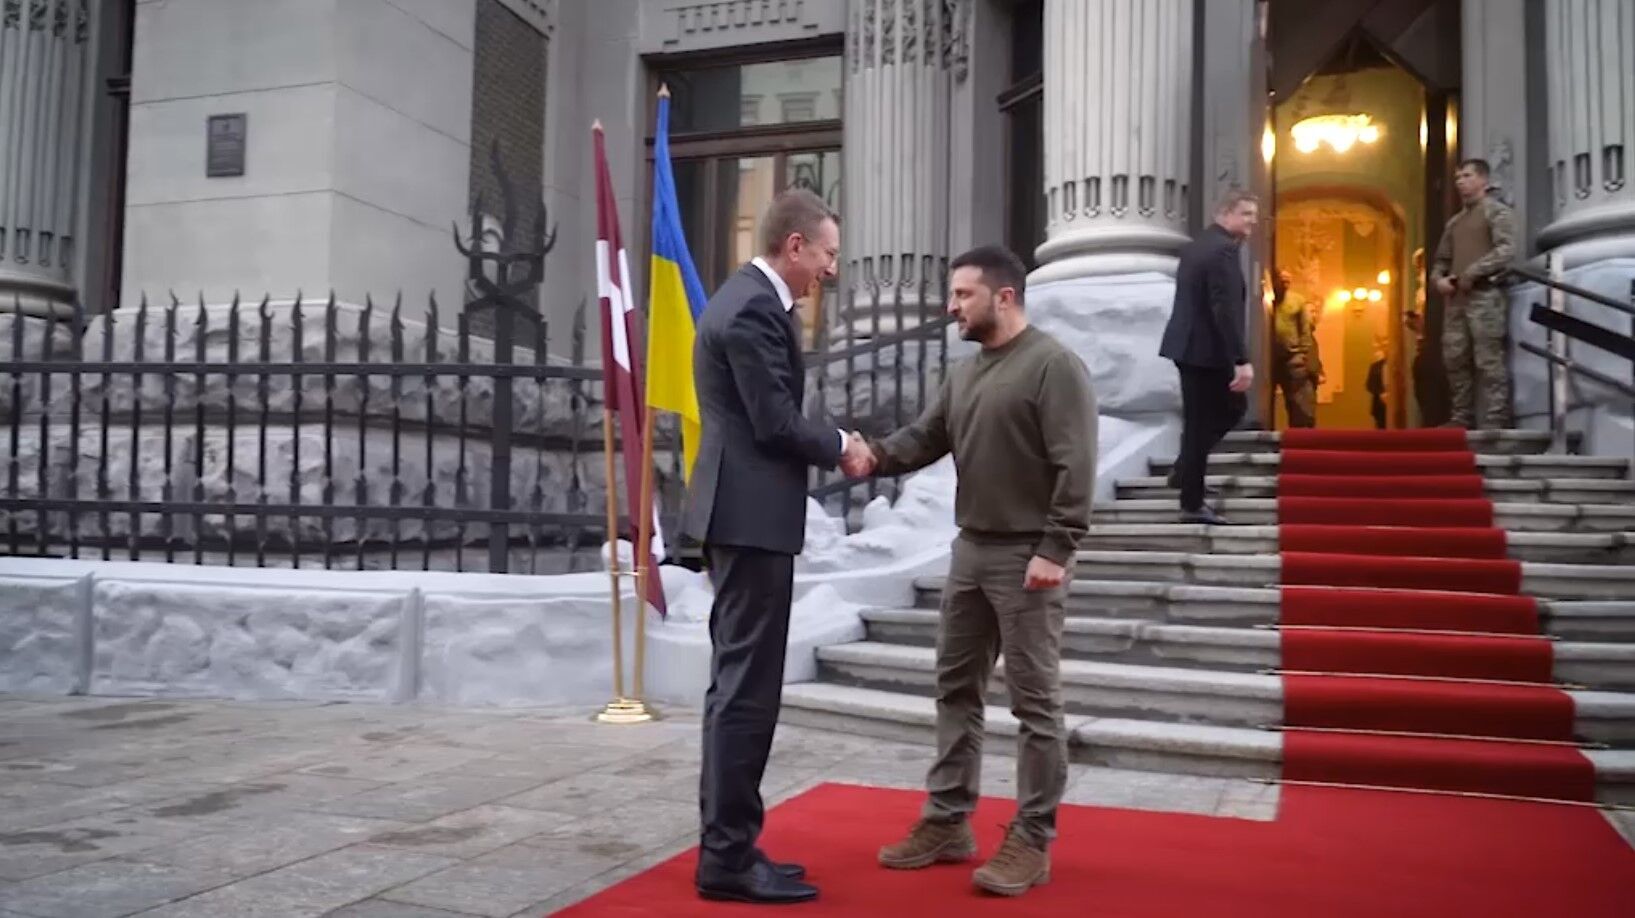 Talked about EU accession and more: Latvian president met with Zelensky in Kiev. Video and details of the talks